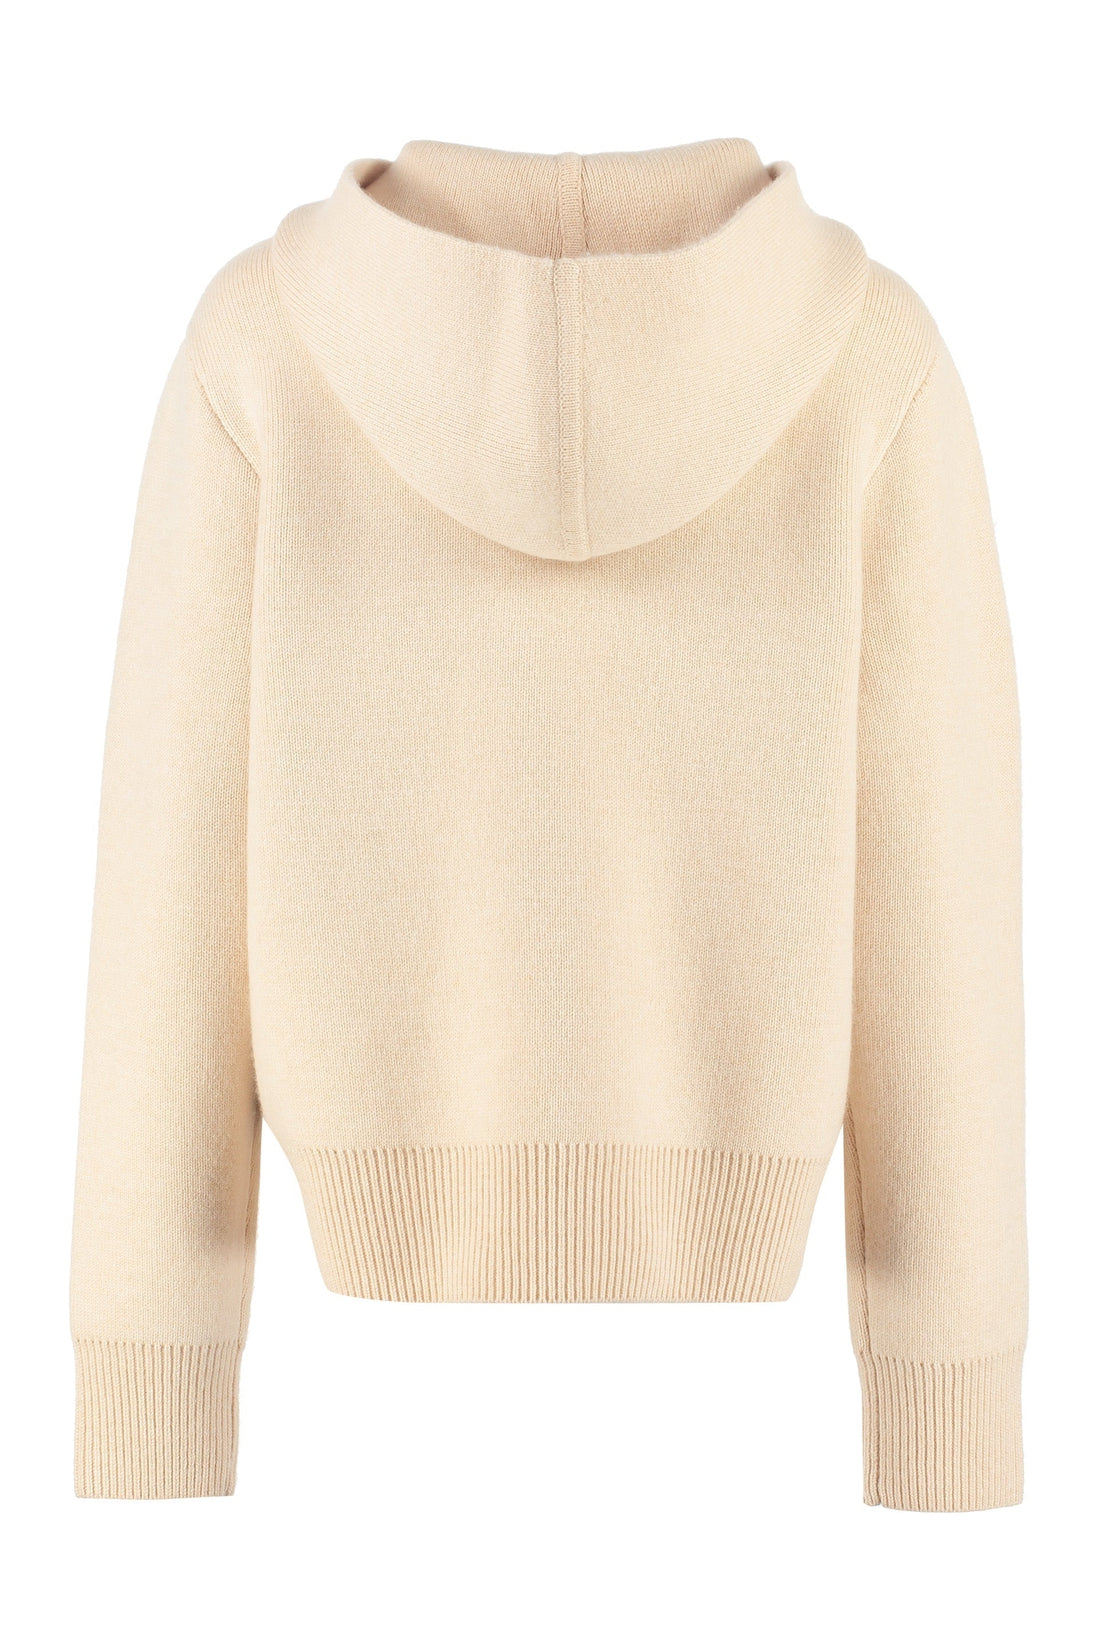 Tory Burch-OUTLET-SALE-Wool and cashmere pullover-ARCHIVIST